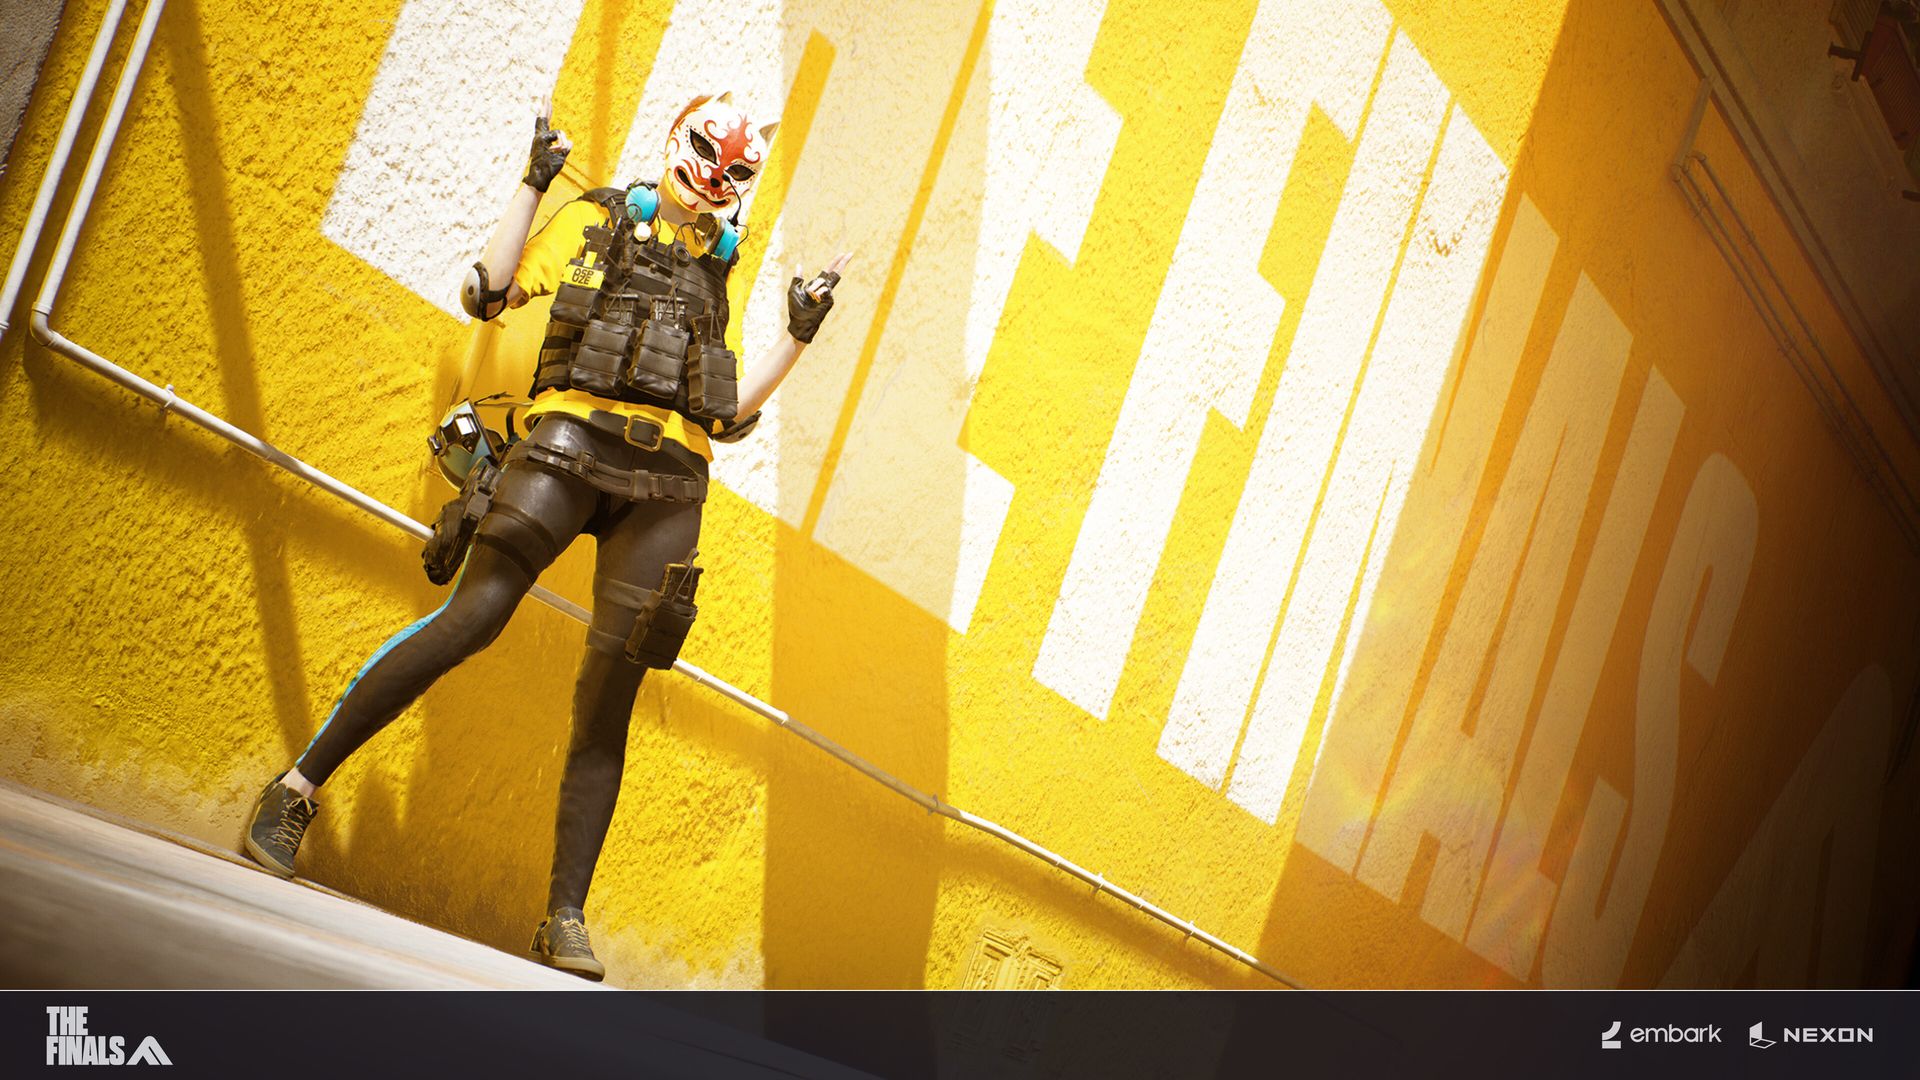 Video game screenshot of a person in a mask and a flak jacket standing in front of a yellow wall